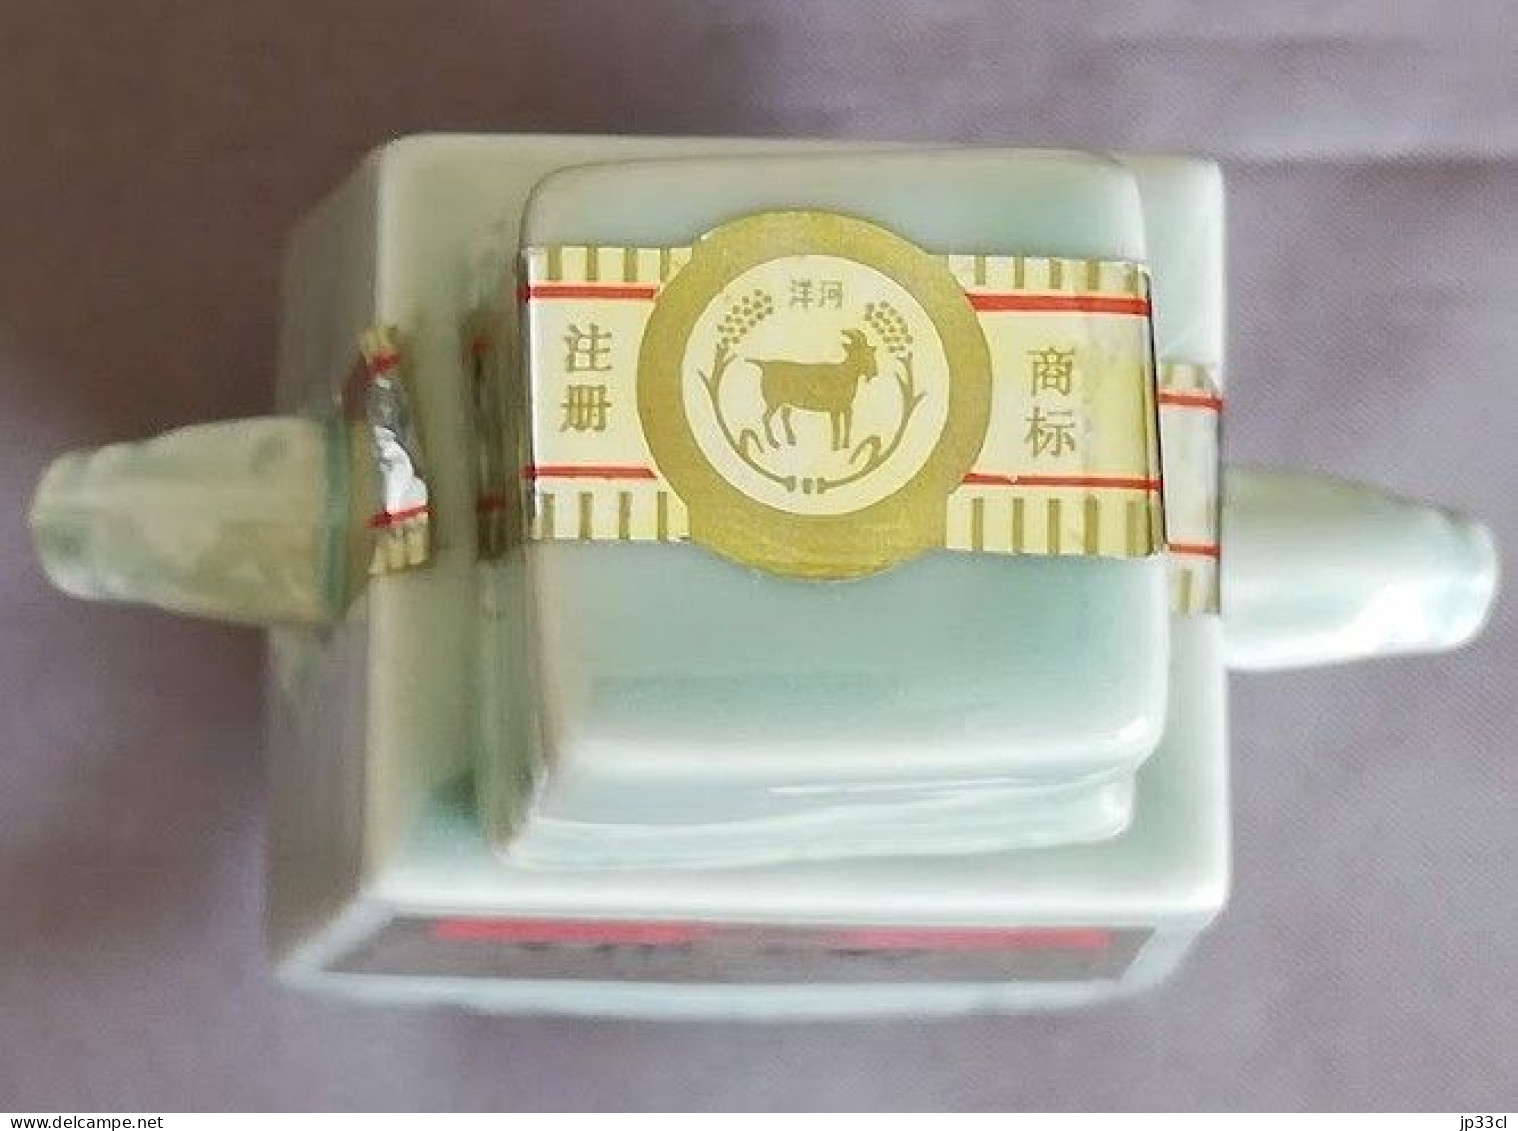 Collector Ceramic Bottle Of China's Famous Spirit YANGHE DAQU 38% Vol, 500 Ml (The Bottle Is Empty) - Spiritueux